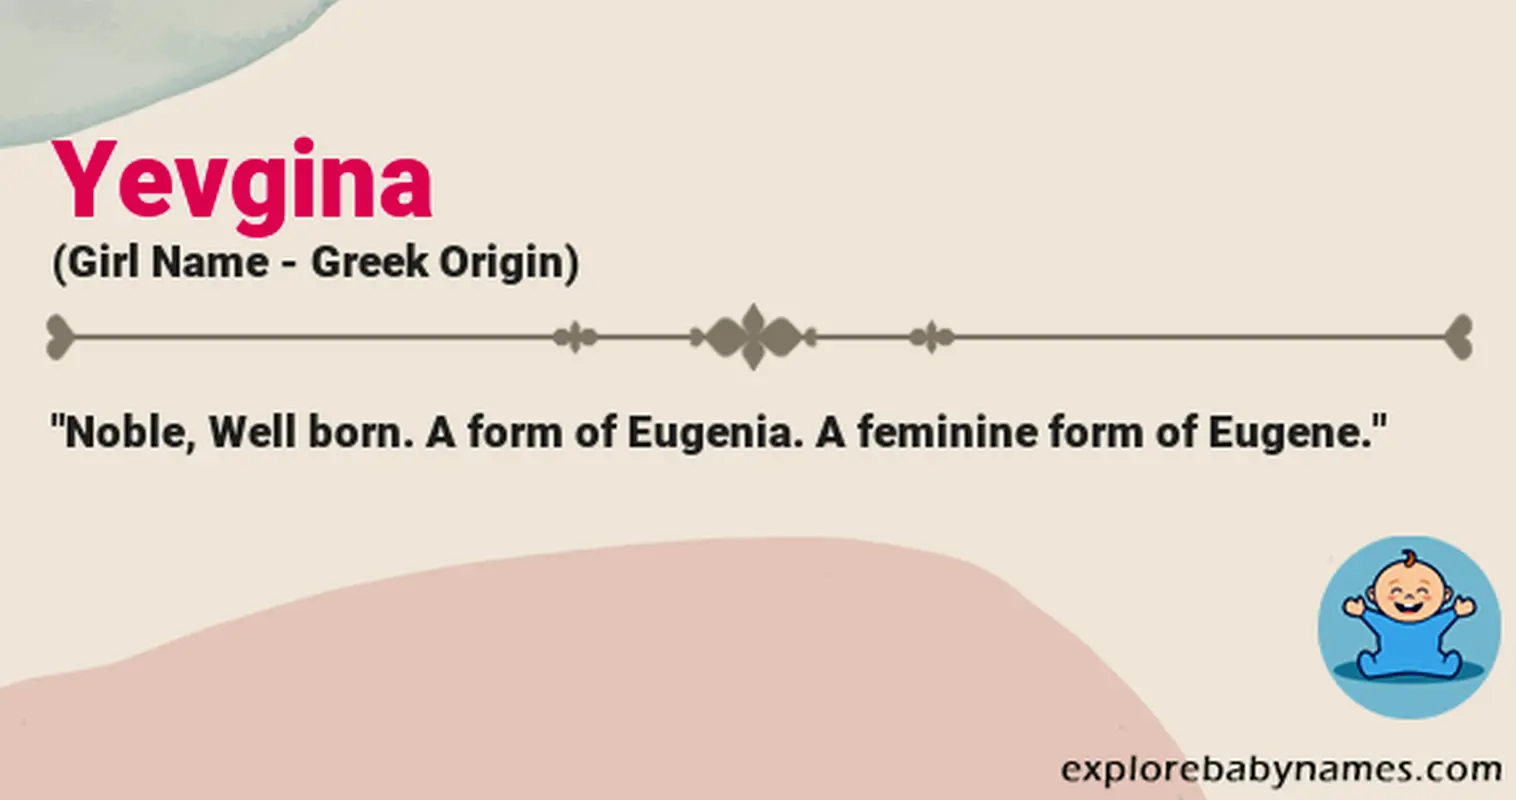 Meaning of Yevgina